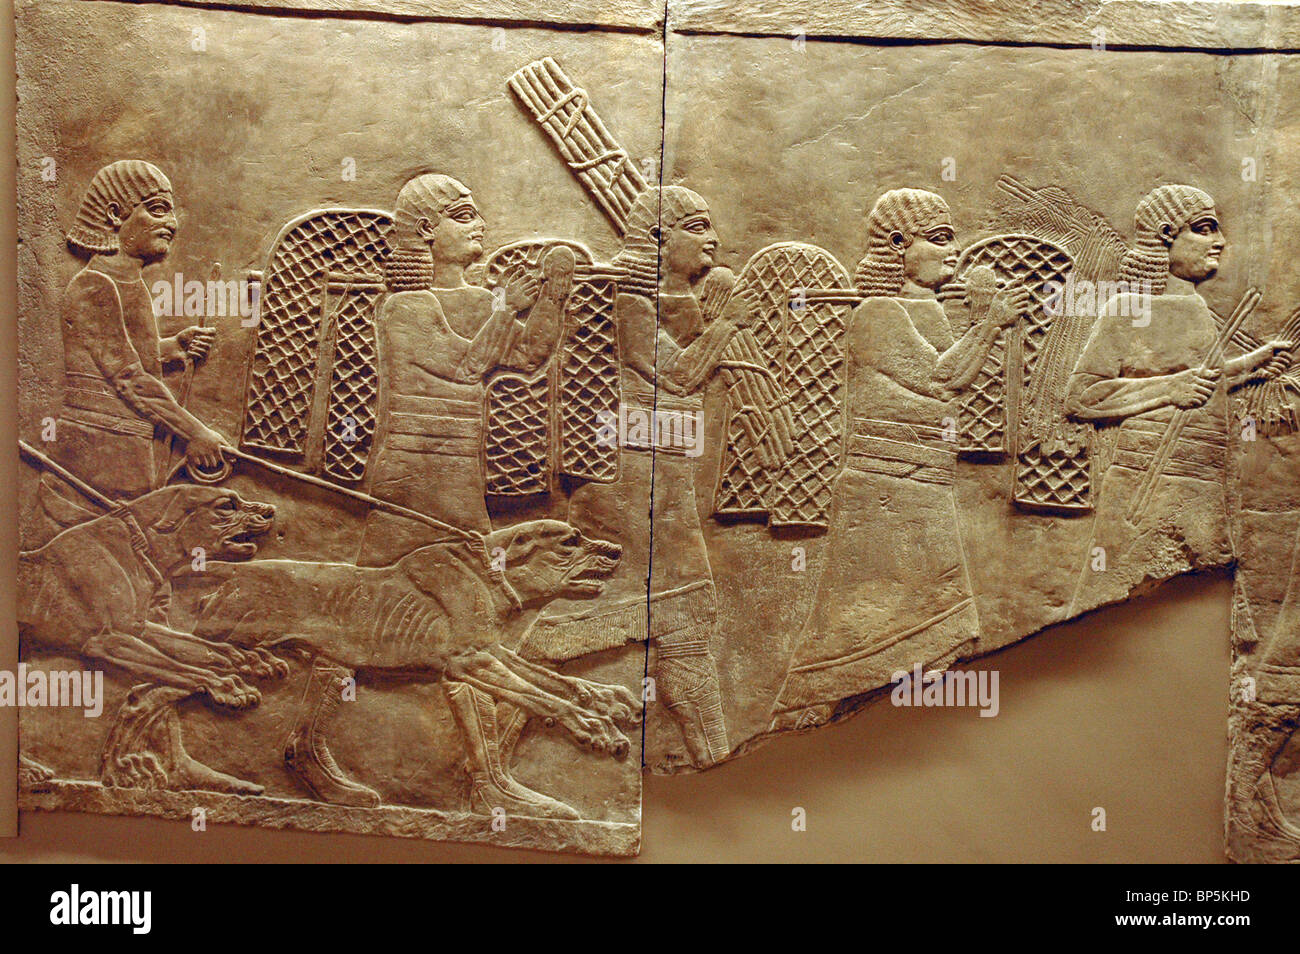 5246. GOING TO THE HUNT WITH NETS AND DOGS (MASTIFF). RELIEF FROM ASHURBANIPAL'S PALACE IN NINVEH DATING C. 645-640 BC Stock Photo